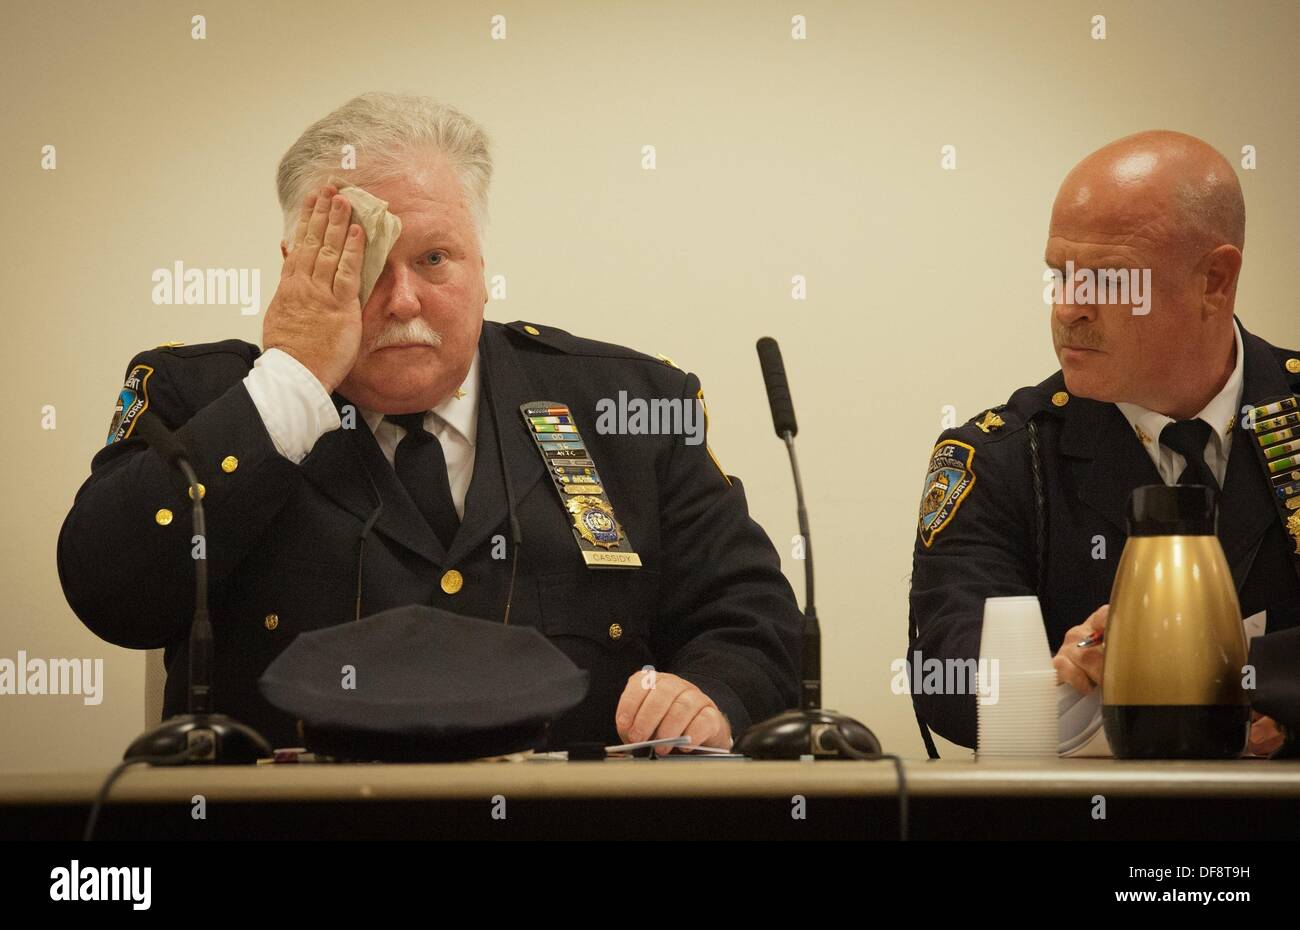 Manhattan, New York, USA. 30th Sep, 2013. NYPD Deputy Chief JOHN CASSIDY speaks as the Council of the City of New York holds an oversight hearing examining the NYPD's Collision Investigation reforms, Monday September 30, 2013. Credit:  Bryan Smith/ZUMAPRESS.com/Alamy Live News Stock Photo